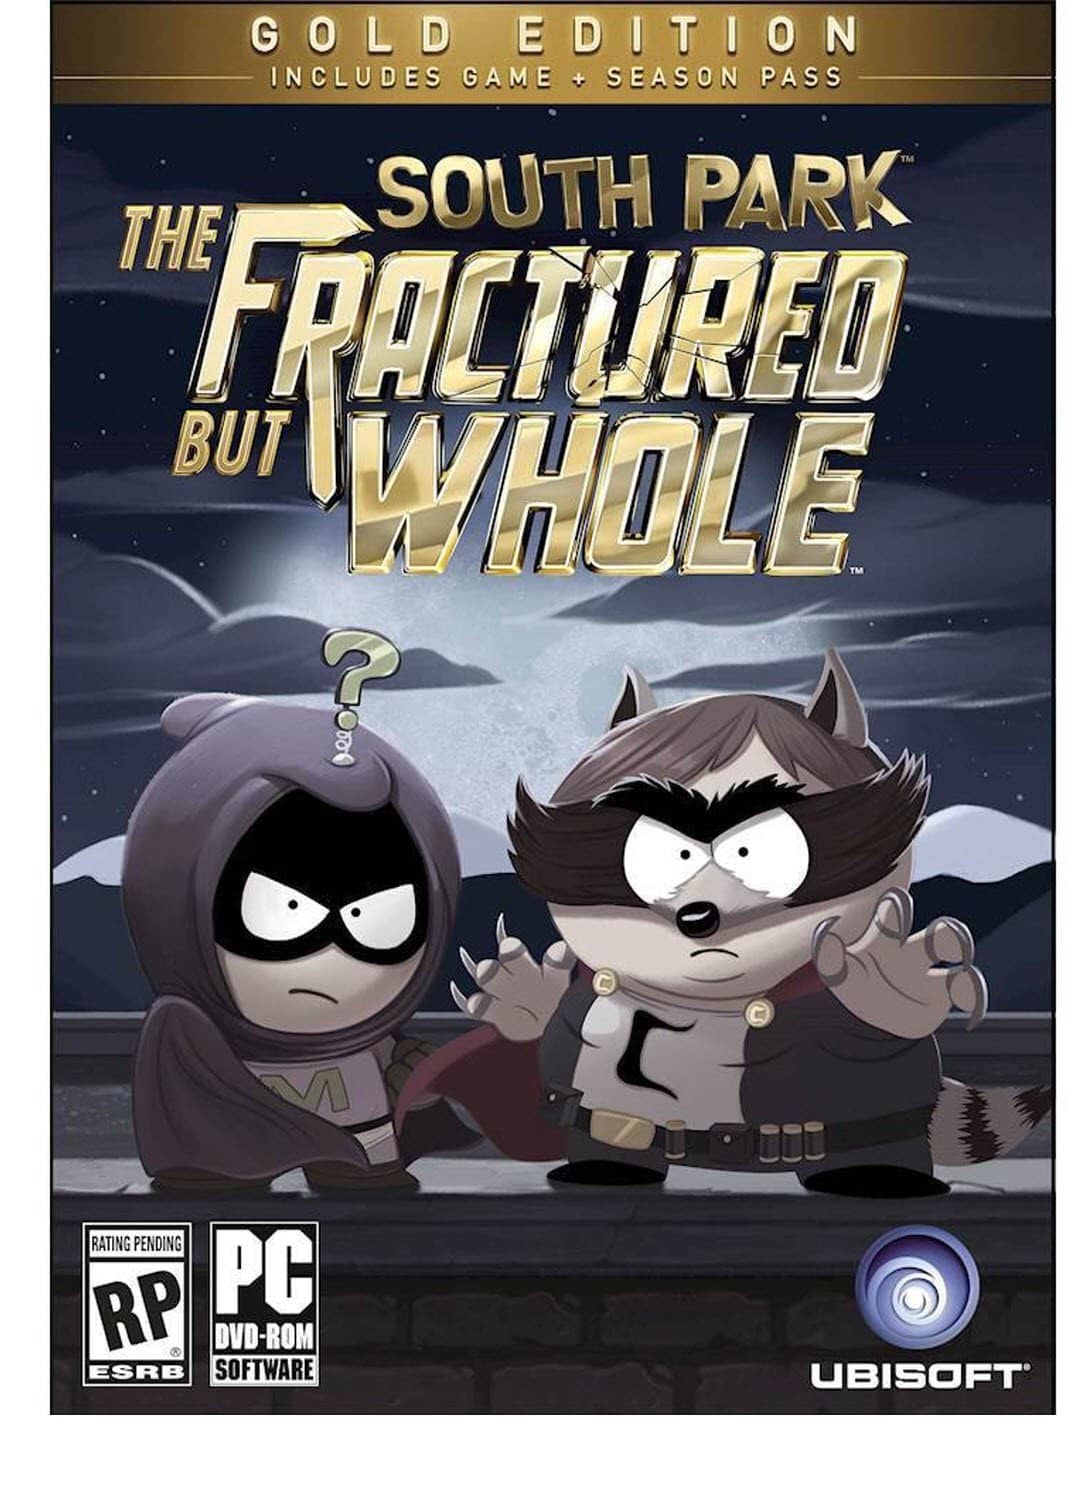 South Park: The Fractured But Whole SteelBook Gold Edition (Includes Season Pass subscription) - Windows